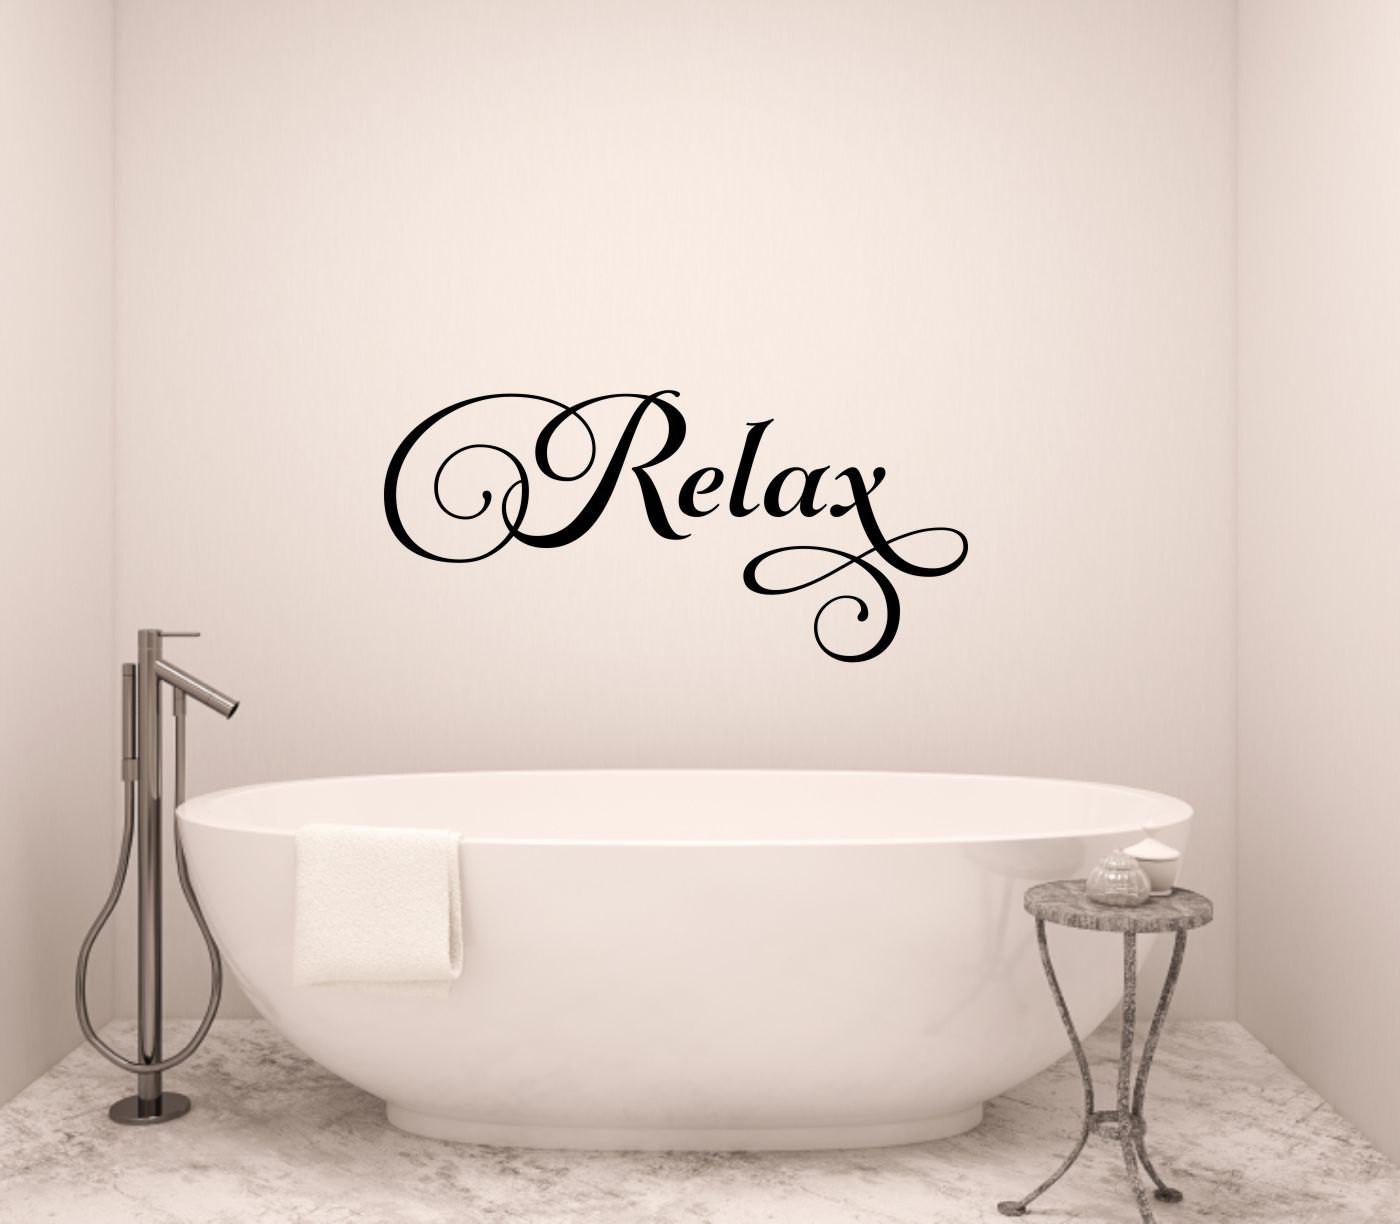 Wall Decals For Bathroom
 Relax Wall Decal Bathroom Wall Decal Bathroom Vinyl Decal